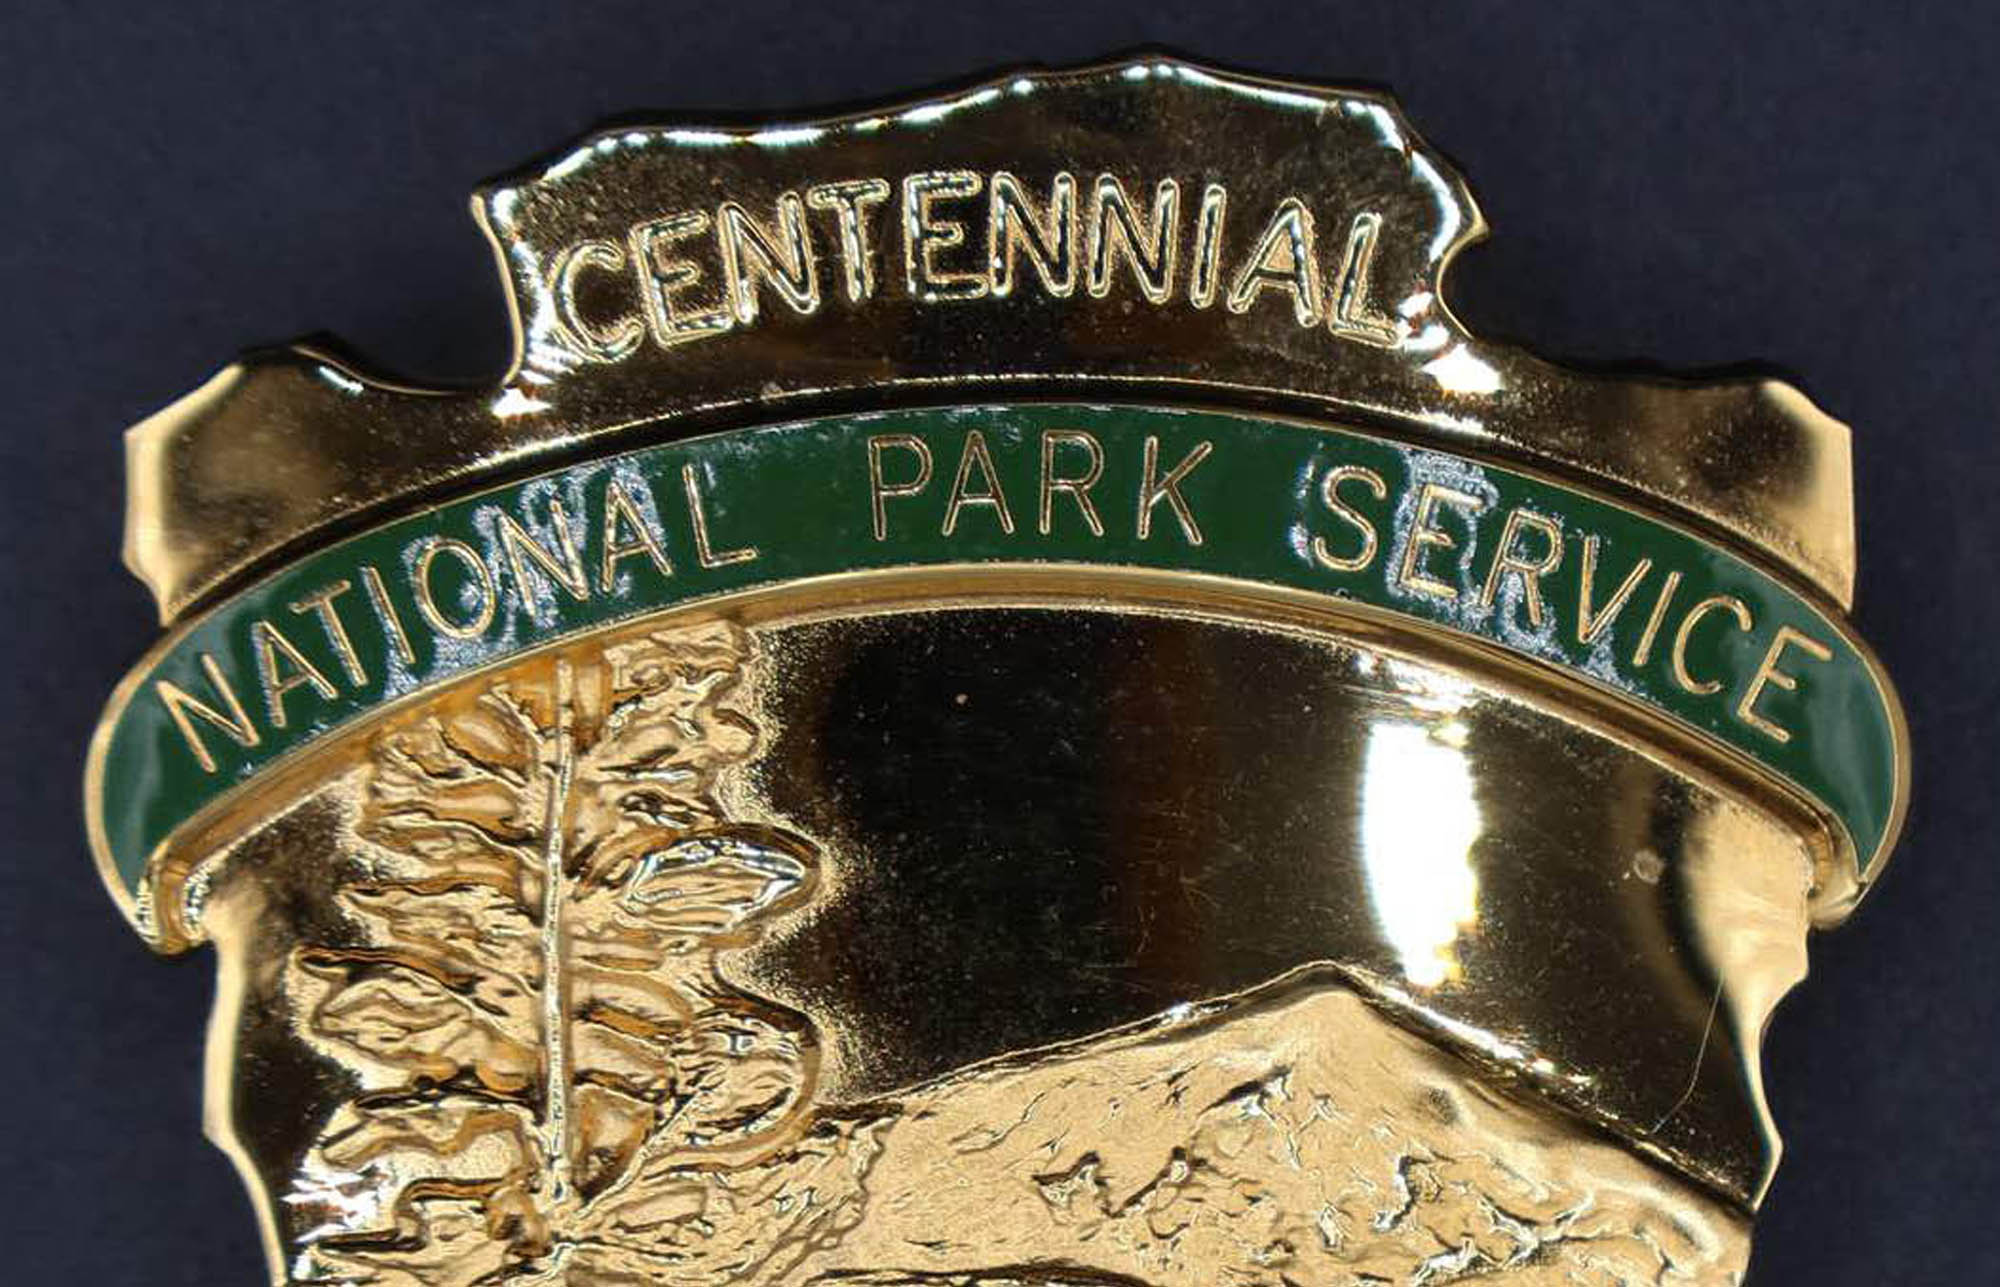 Gold arrowhead-shaped badge featuring bison scene engraved with Centennial at top and 1916-2016 below. Green banner reads National Park Service.e